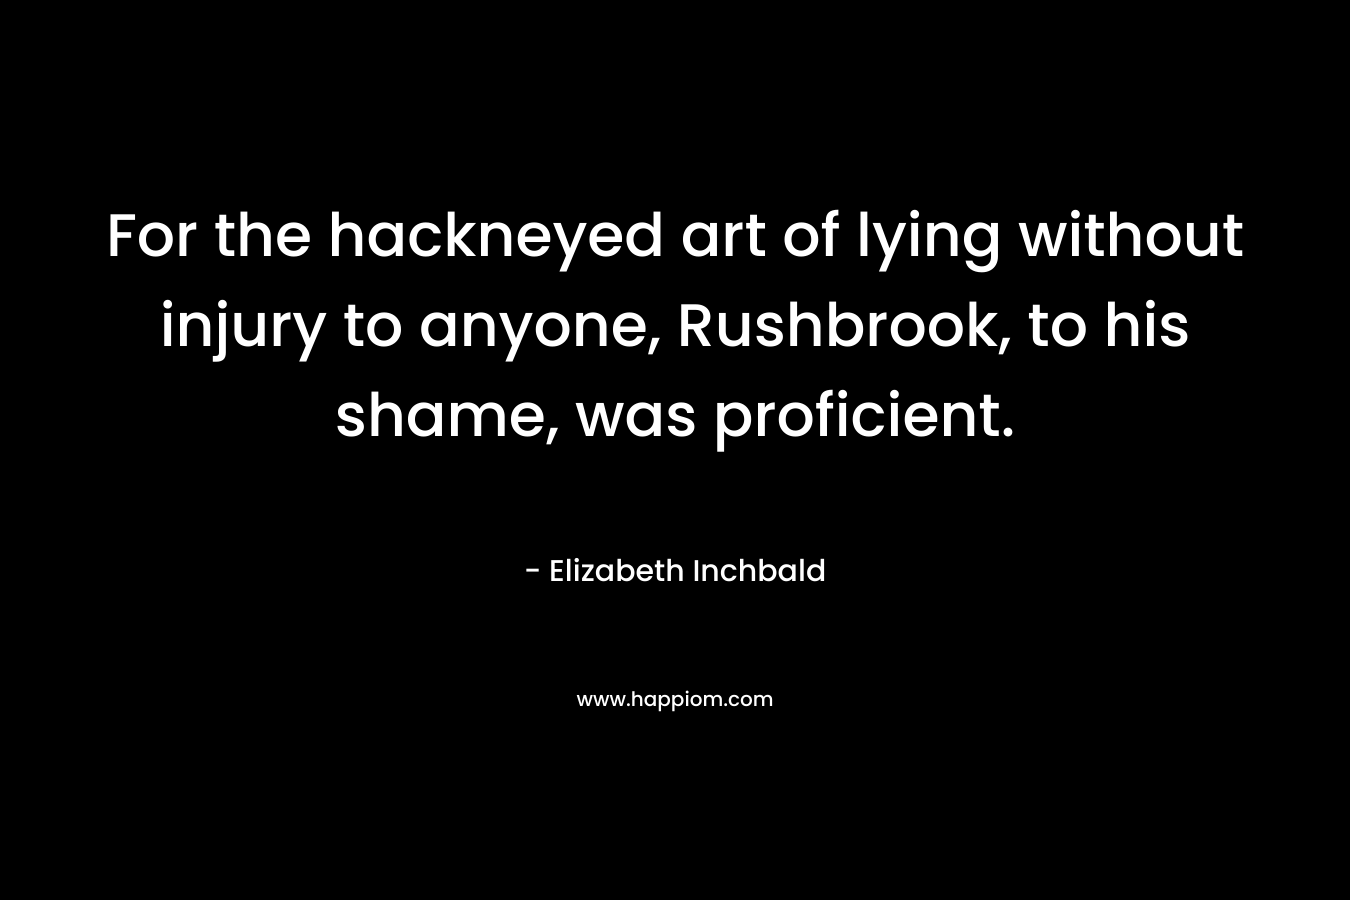 For the hackneyed art of lying without injury to anyone, Rushbrook, to his shame, was proficient. – Elizabeth Inchbald